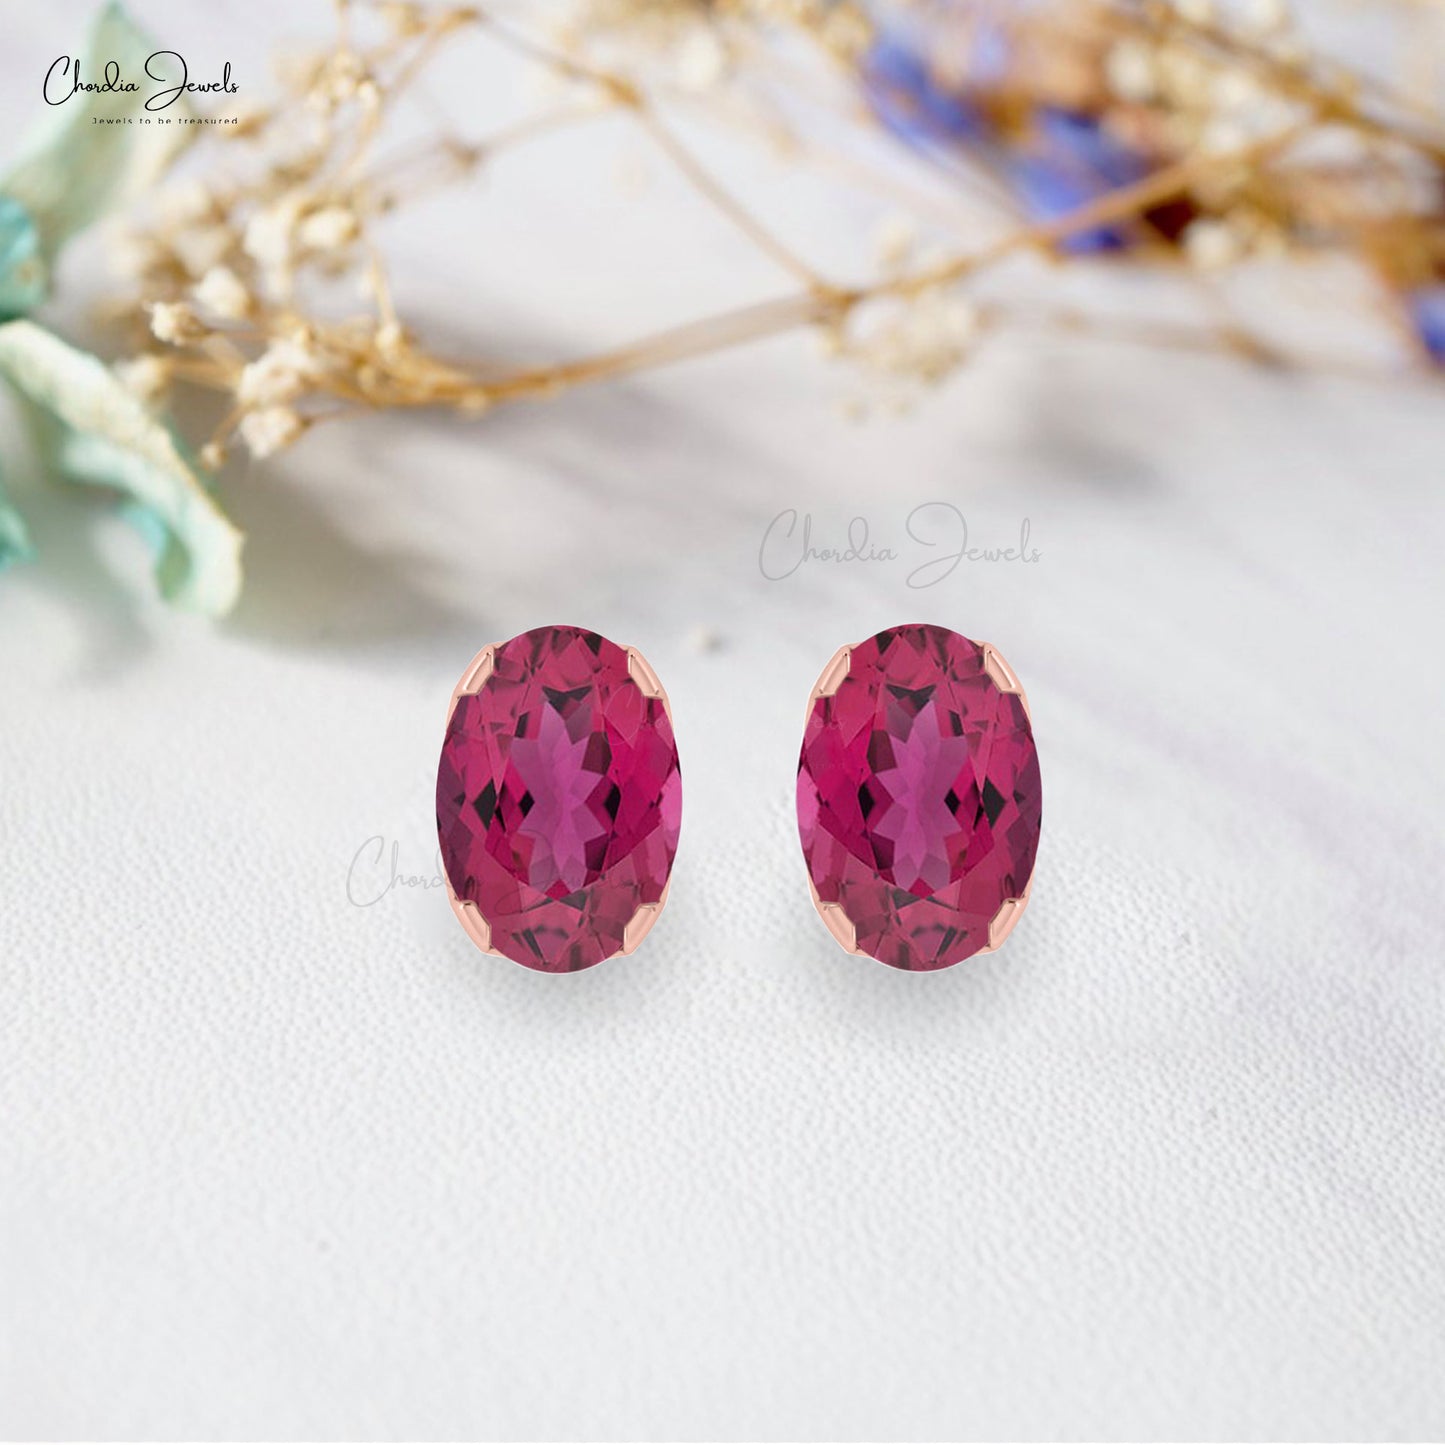 Genuine Pink Tourmaline Oval Cut Gemstone Studs Earring 14k Solid Gold Earrings For October Birthstone